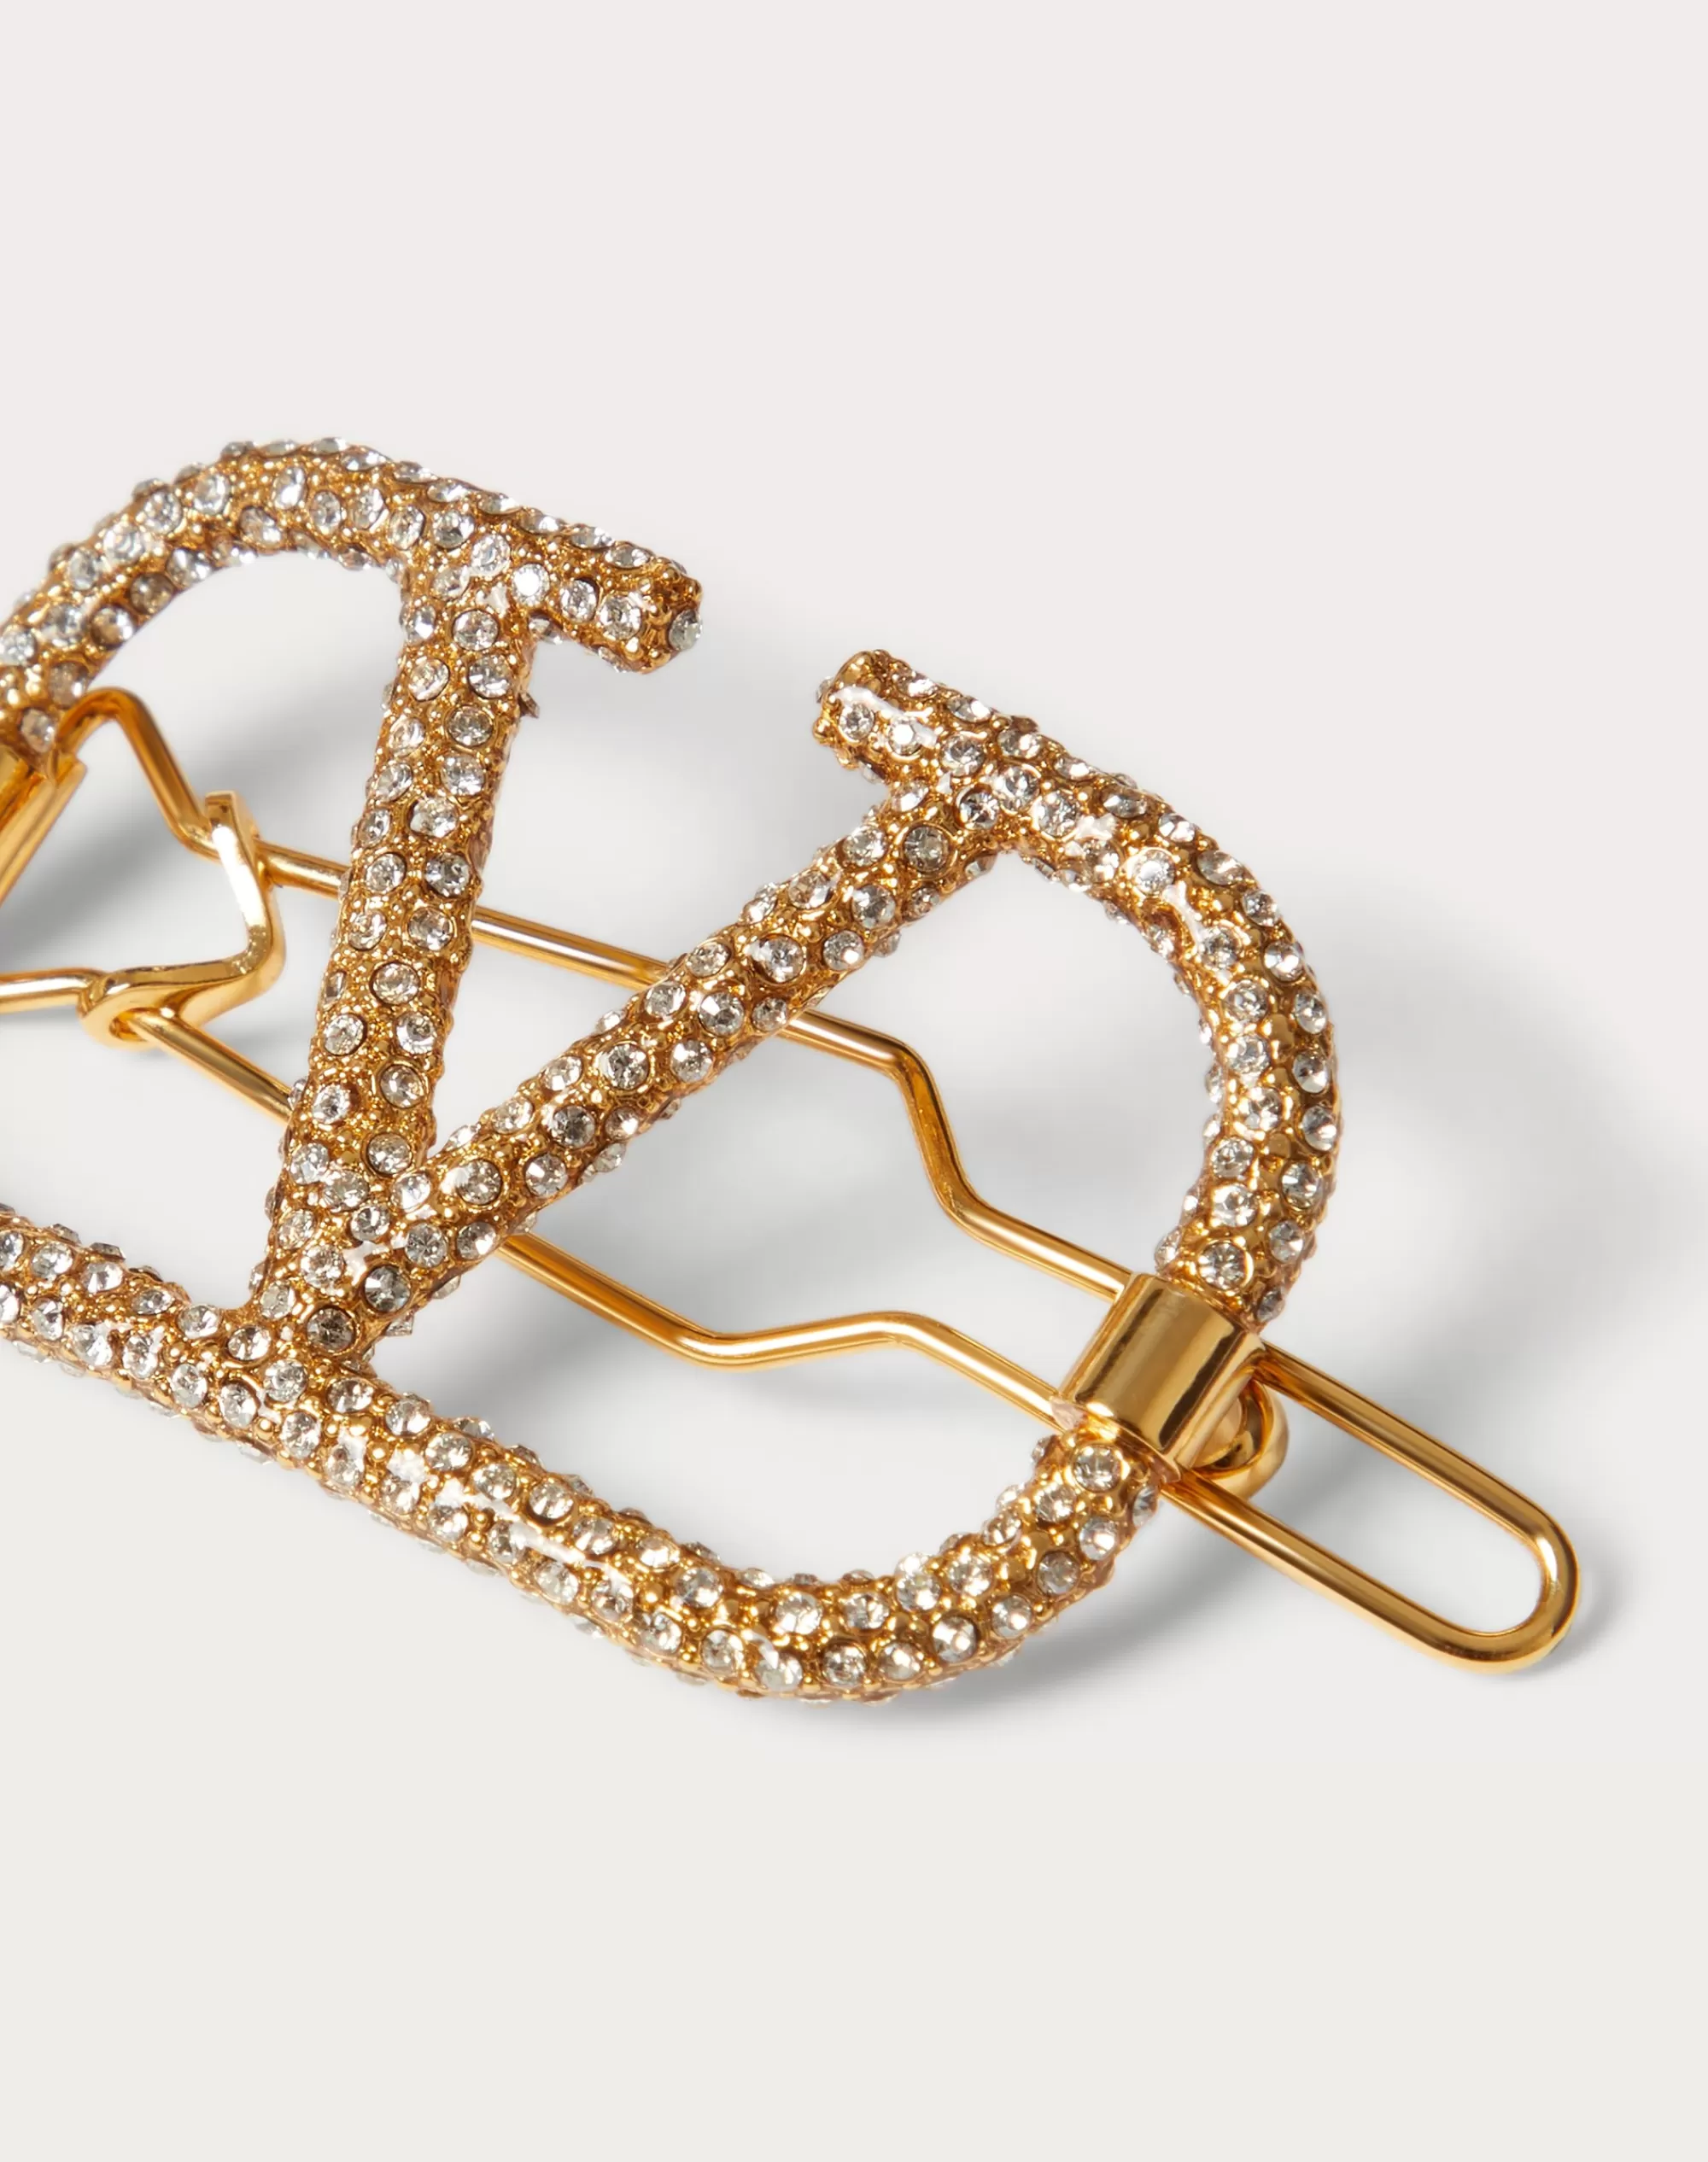 Valentino VLOGO SIGNATURE METAL AND SWAROVSKI® CRYSTAL HAIR ACCESSORY Gold Outlet